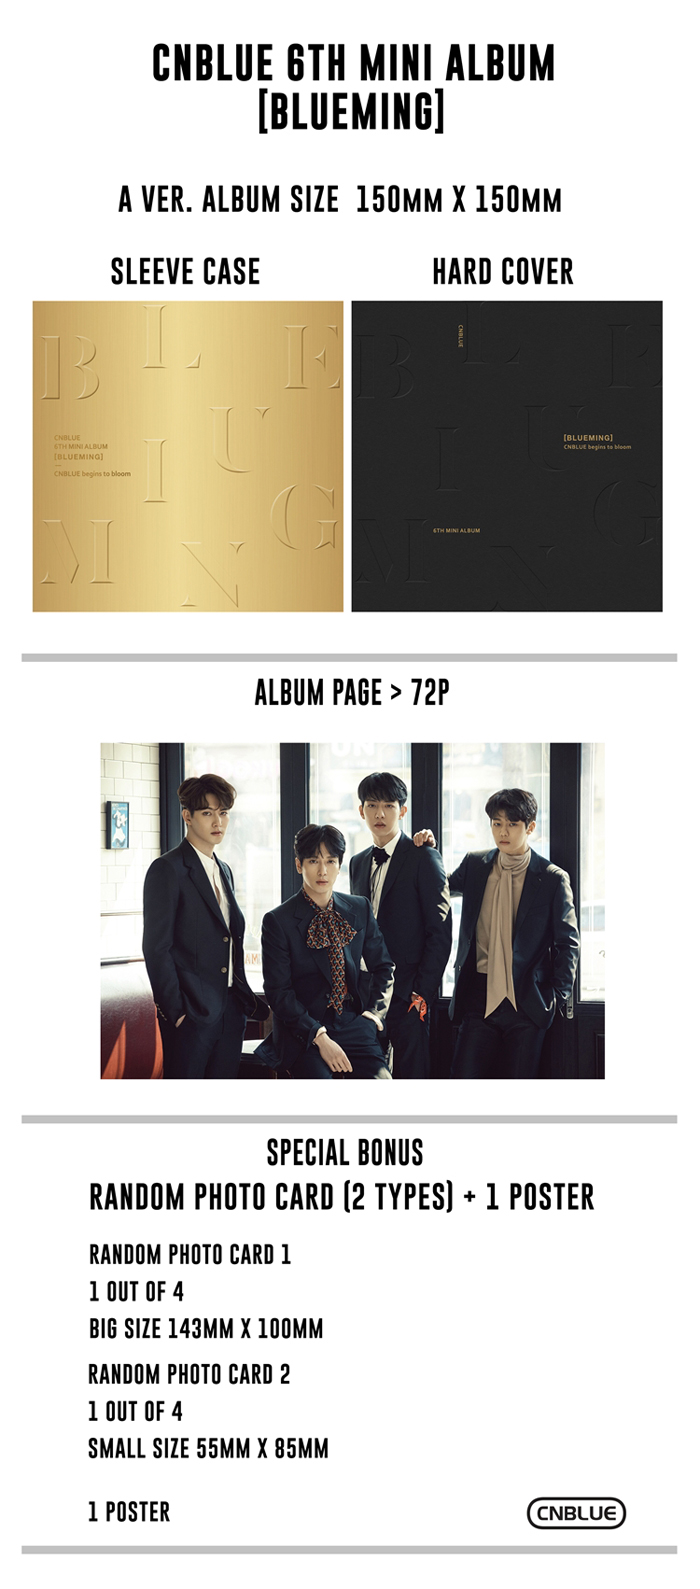 A Ver 6th Mini Album : CD+2Photocard+Poster+GiftPhoto,New,FNC CNBLUE BLUEMING 